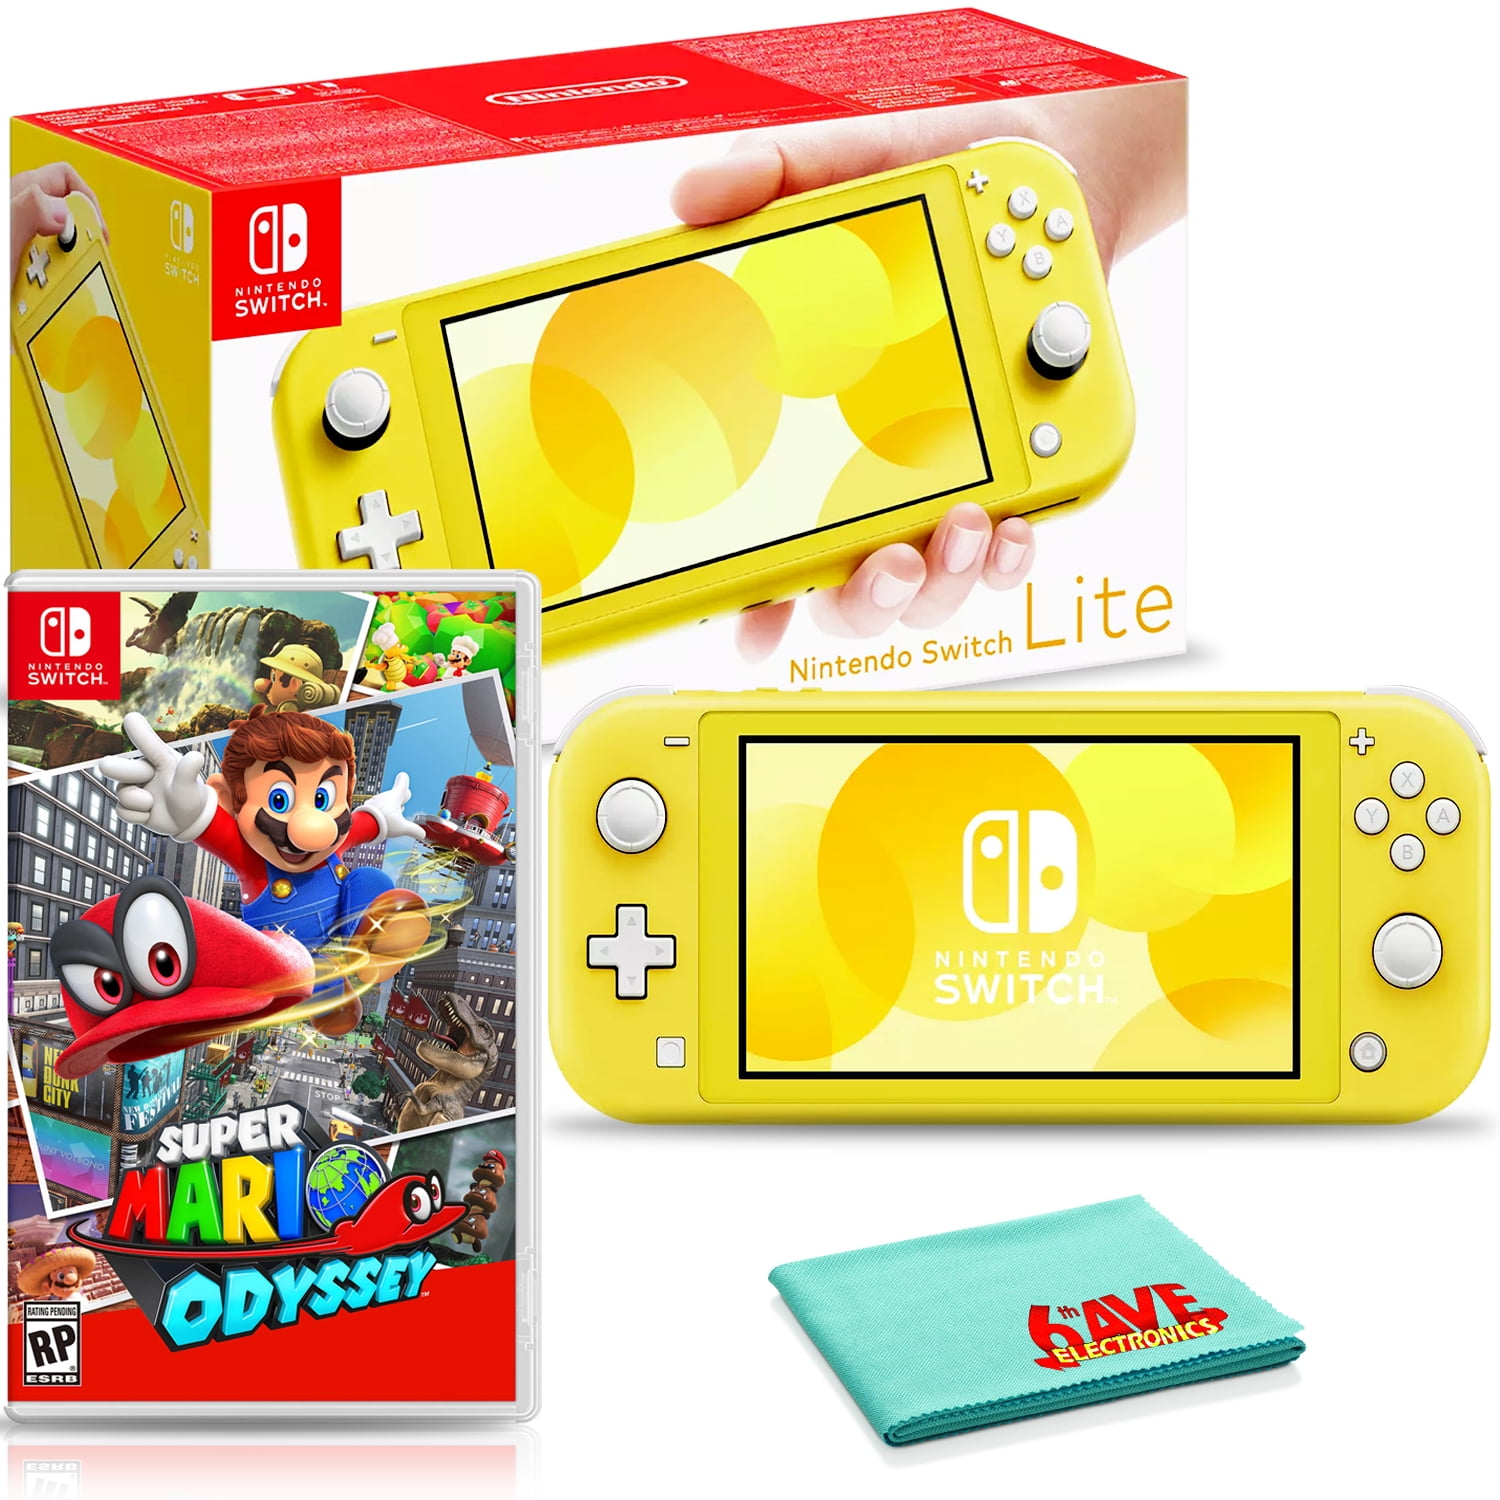 Nintendo Switch Lite (Yellow) Bundle with Super Mario Odyssey and 6Ave